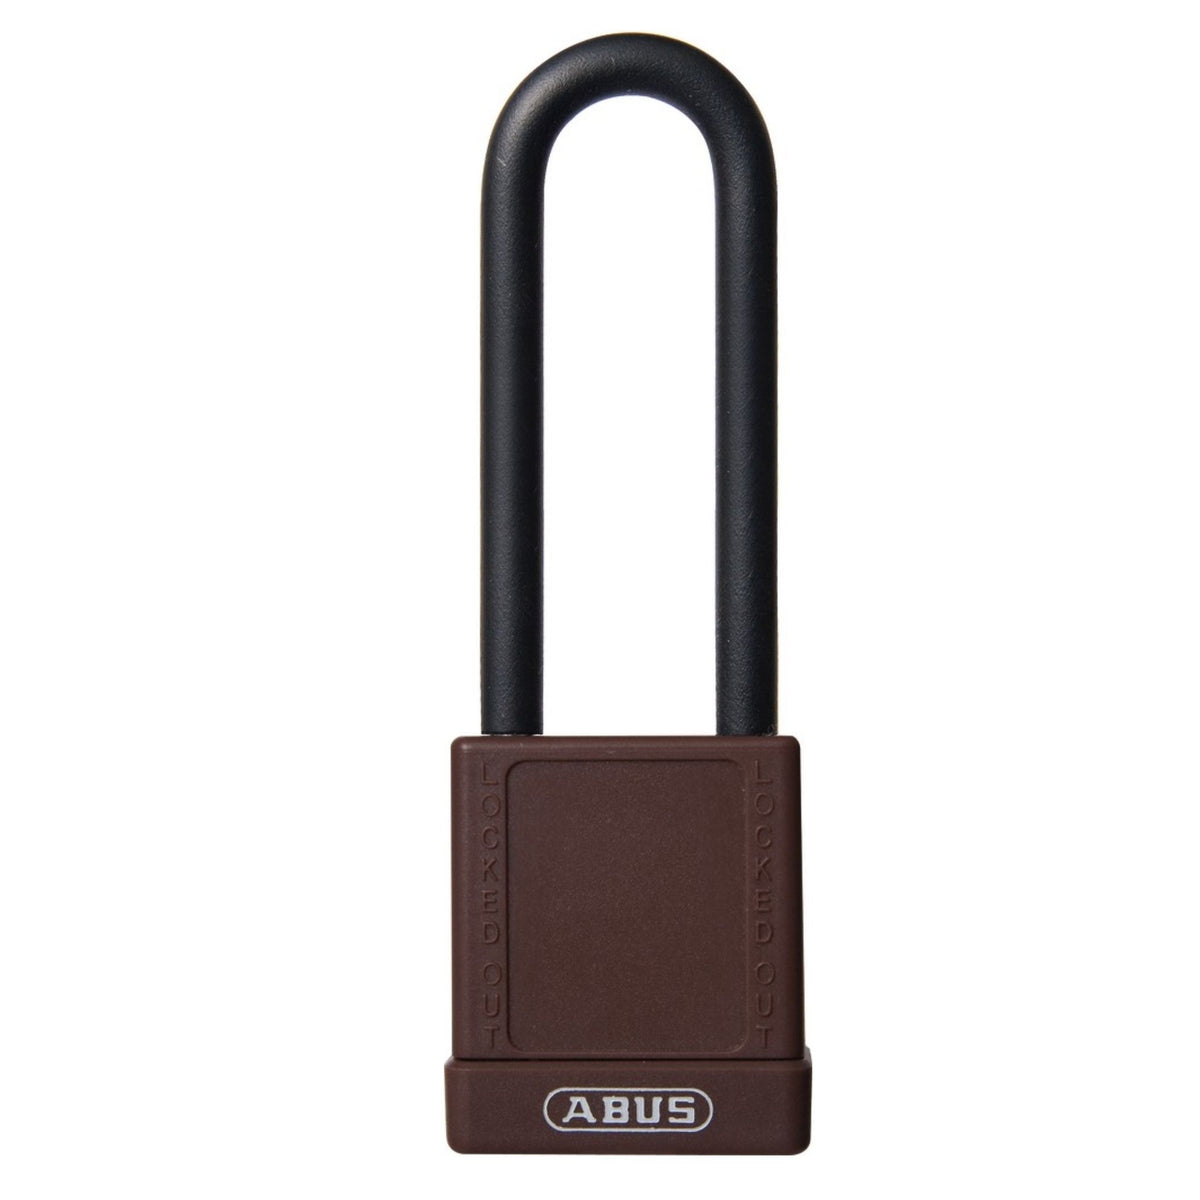 Abus 74/40HB75 KD Keyed Different Brown Safety Padlock, 3-Inch Shackle - The Lock Source